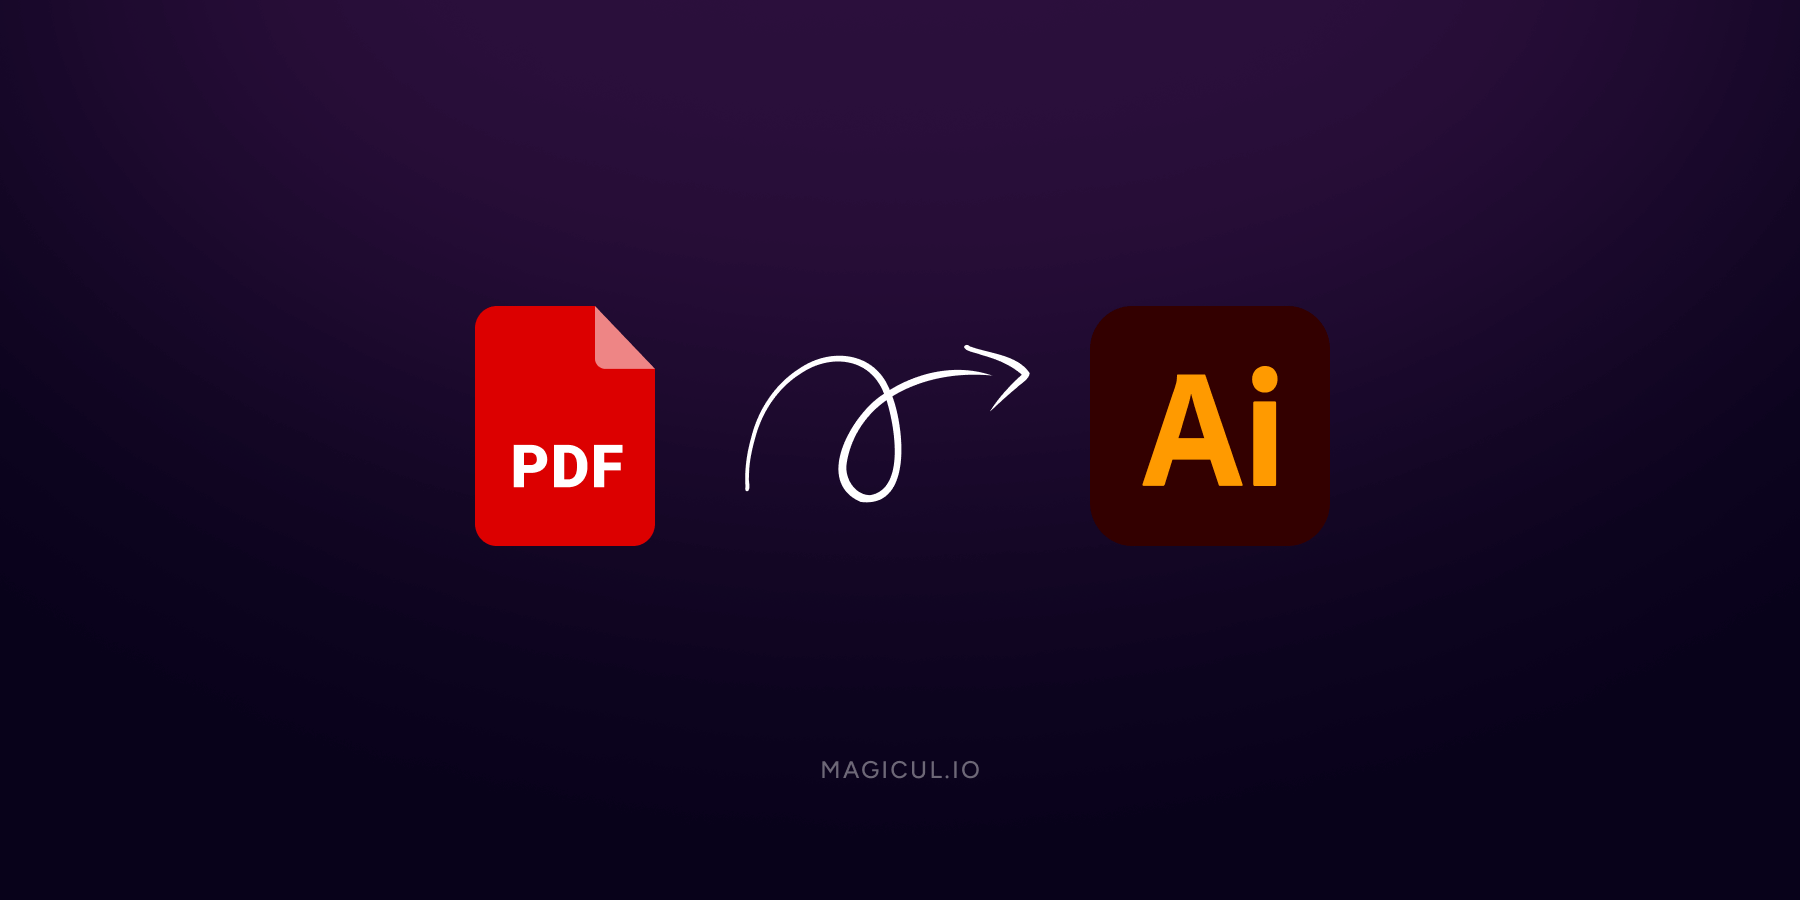 How to Convert PDF to Adobe Illustrator format